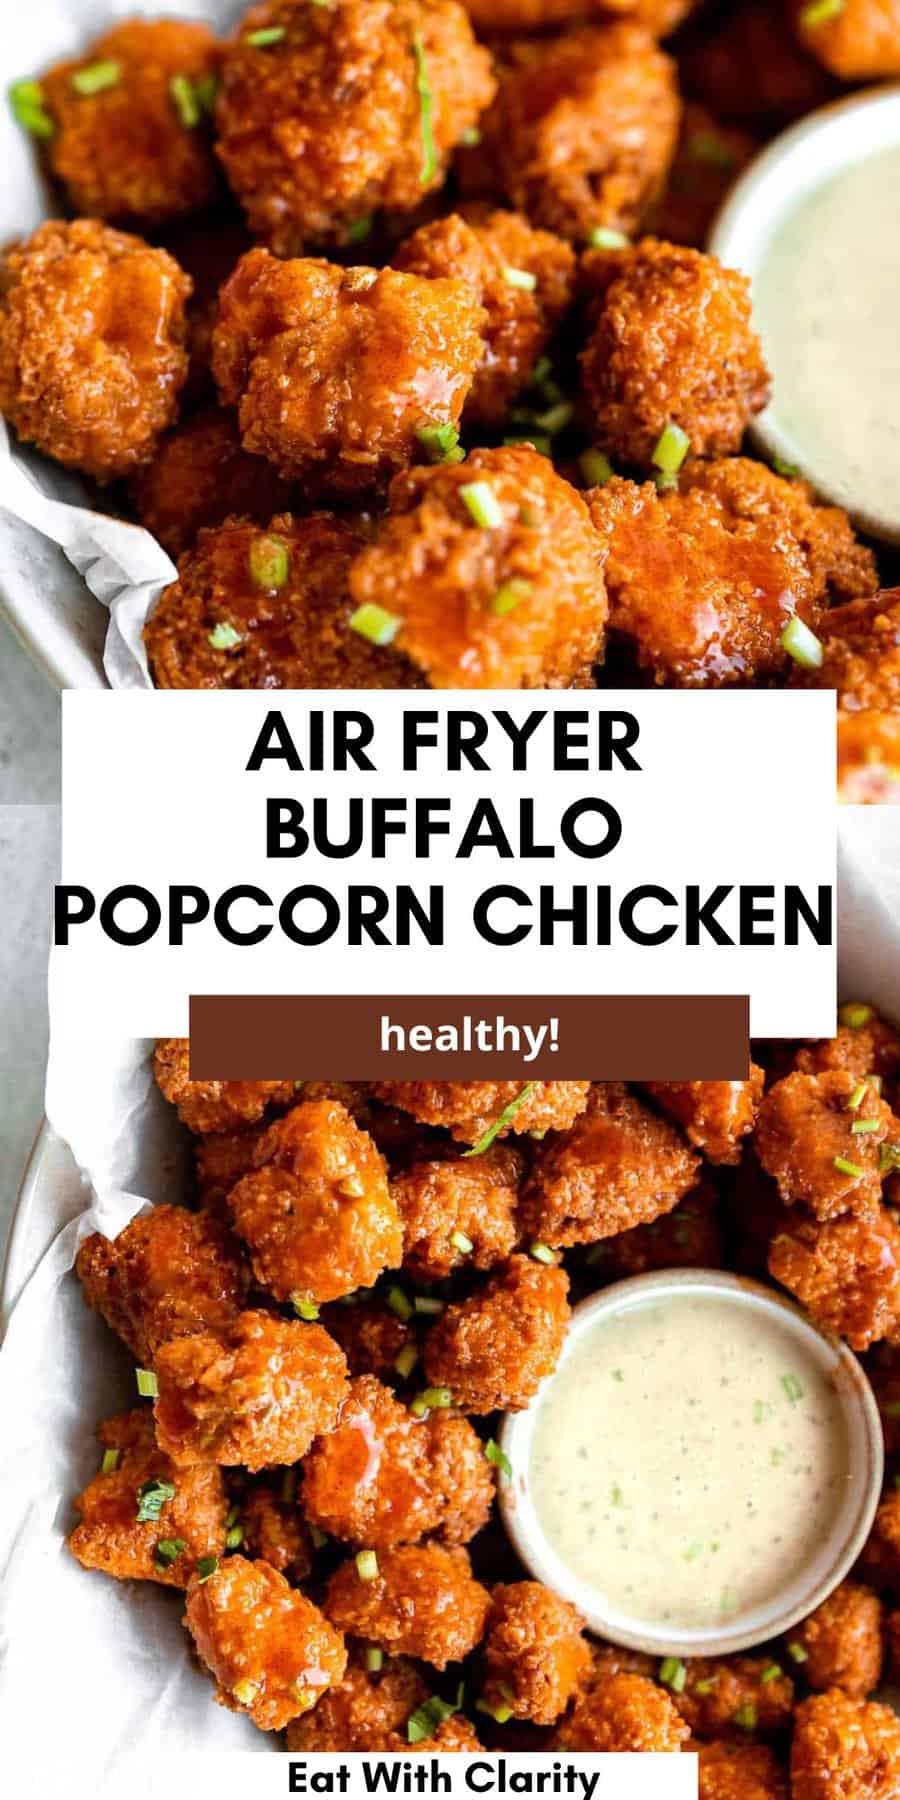 Air Fryer Buffalo Popcorn Chicken - Eat With Clarity